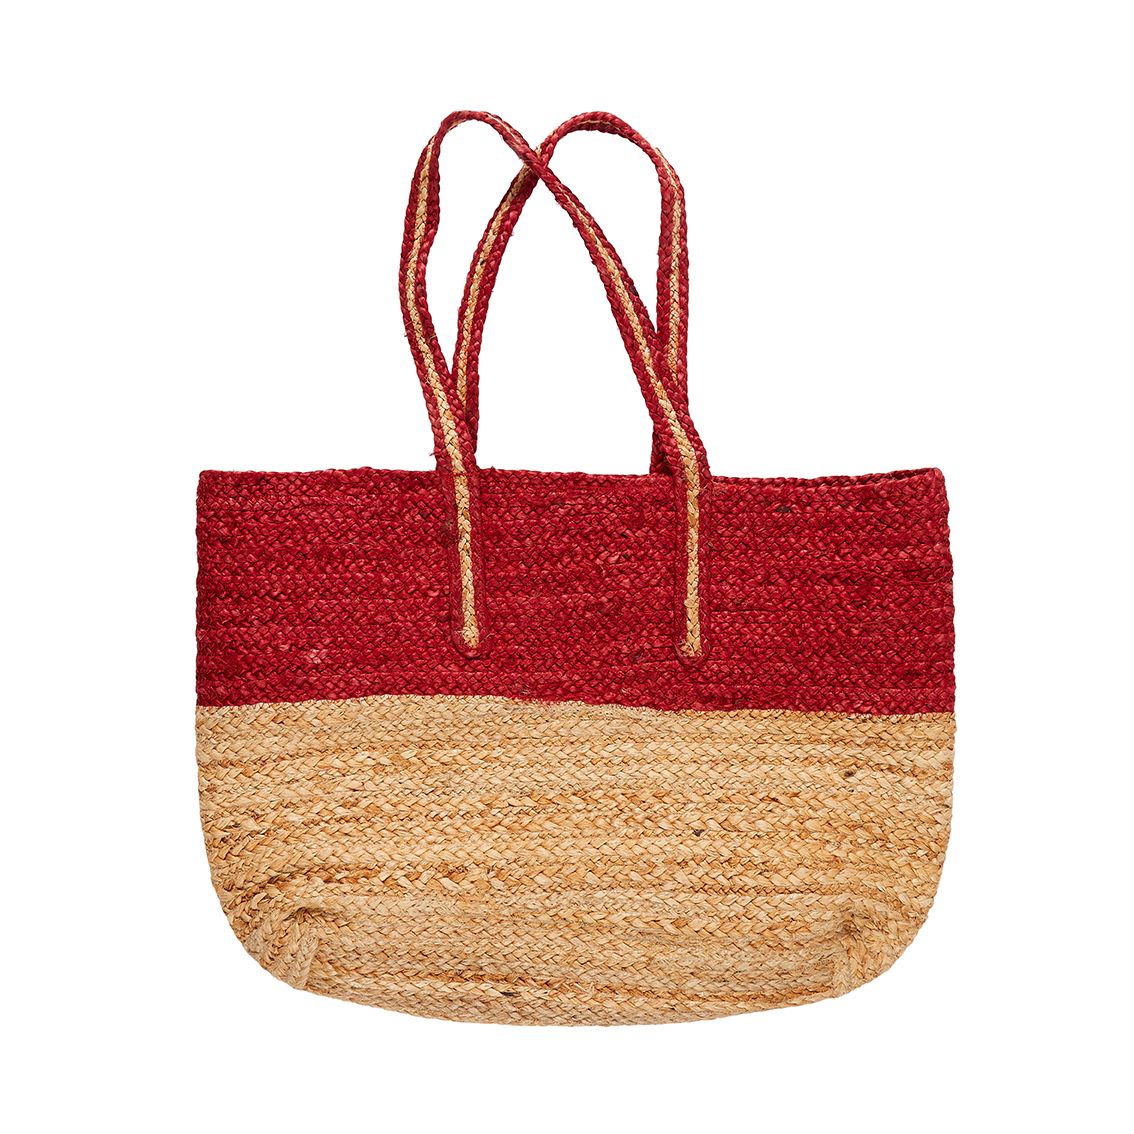 RECYCLED LARGE ORGANIC RED JUTE BEACH ECO-TOTE